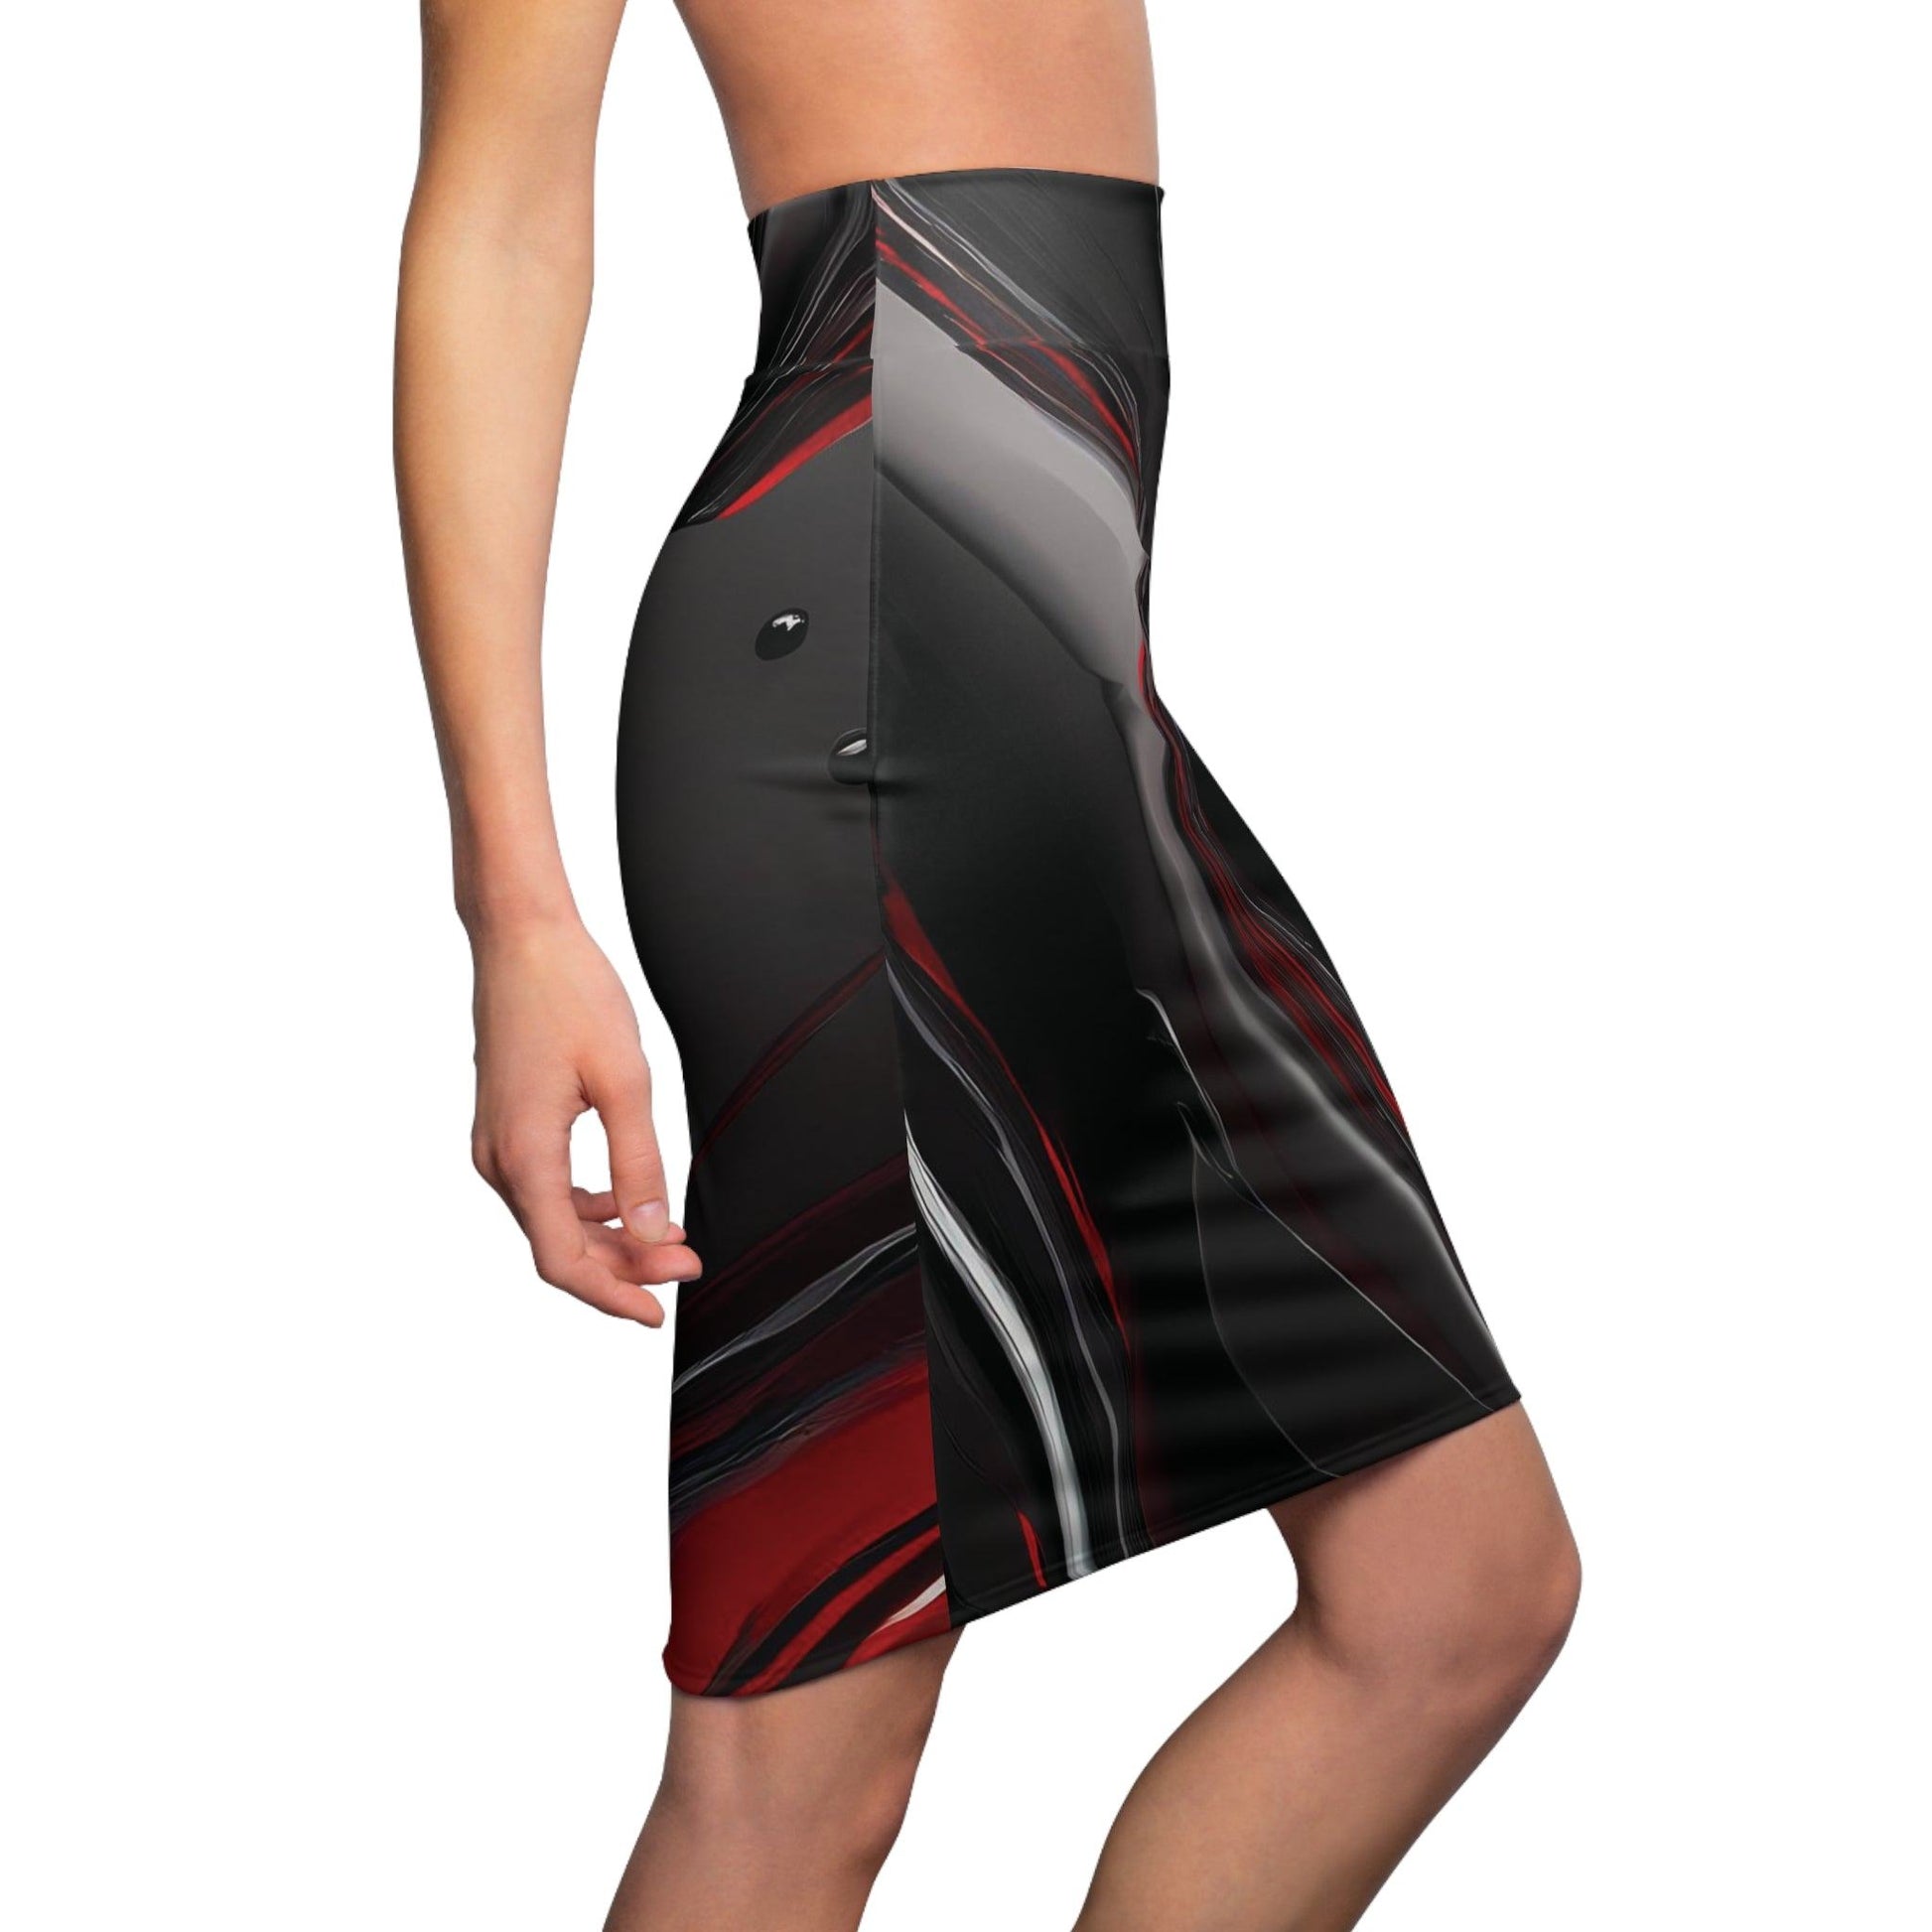 Liquid Red Bleistiftrock Bleistiftrock 74.99 All Over Print, AOP, AOP Clothing, Assembled in the USA, Assembled in USA, Bleistiftrock, Made in the USA, Made in USA, Skirts & Dresses, Sublimation, Women's Clothing JLR Design